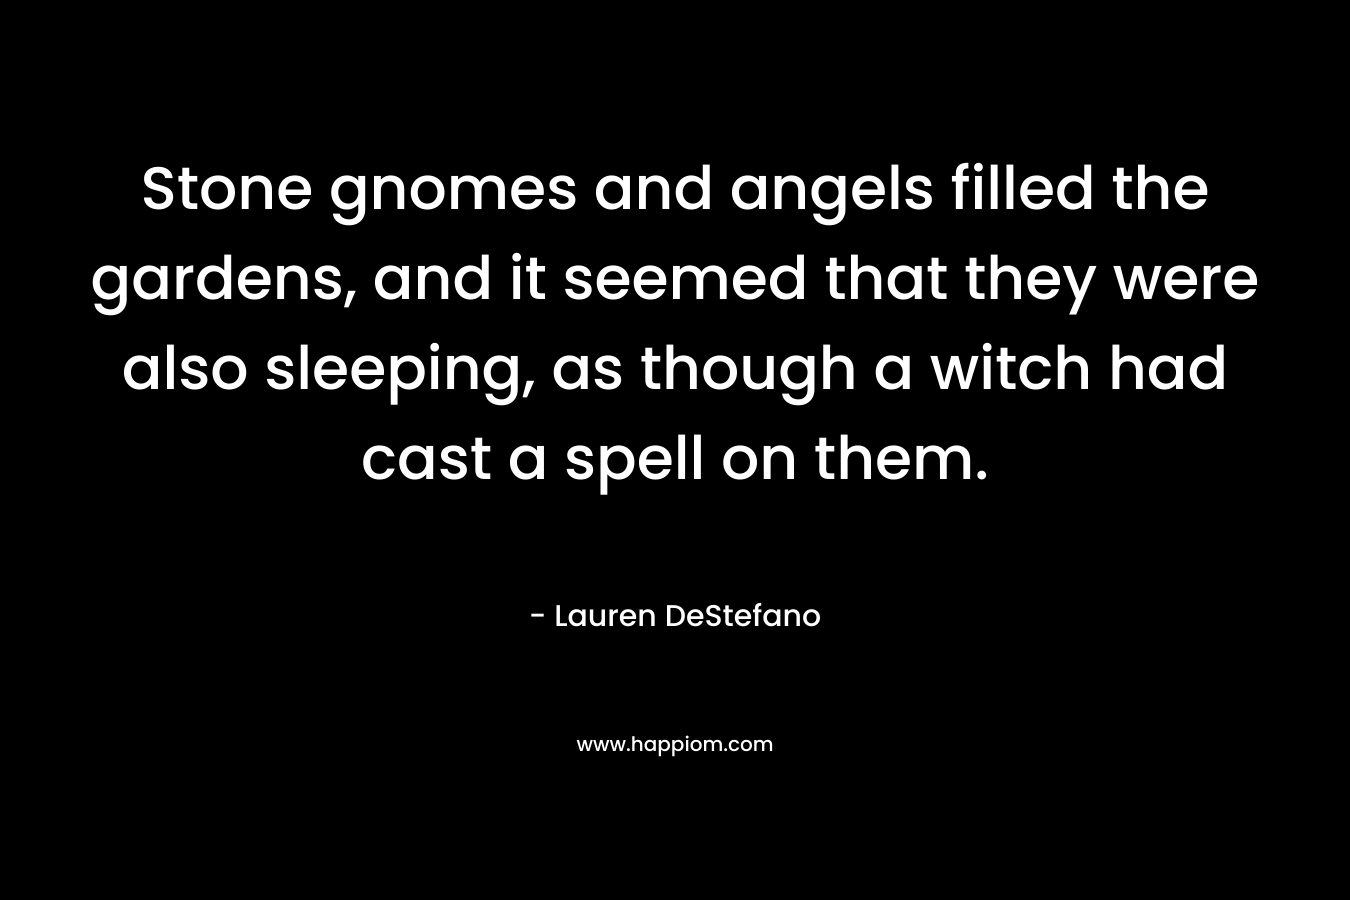 Stone gnomes and angels filled the gardens, and it seemed that they were also sleeping, as though a witch had cast a spell on them. – Lauren DeStefano